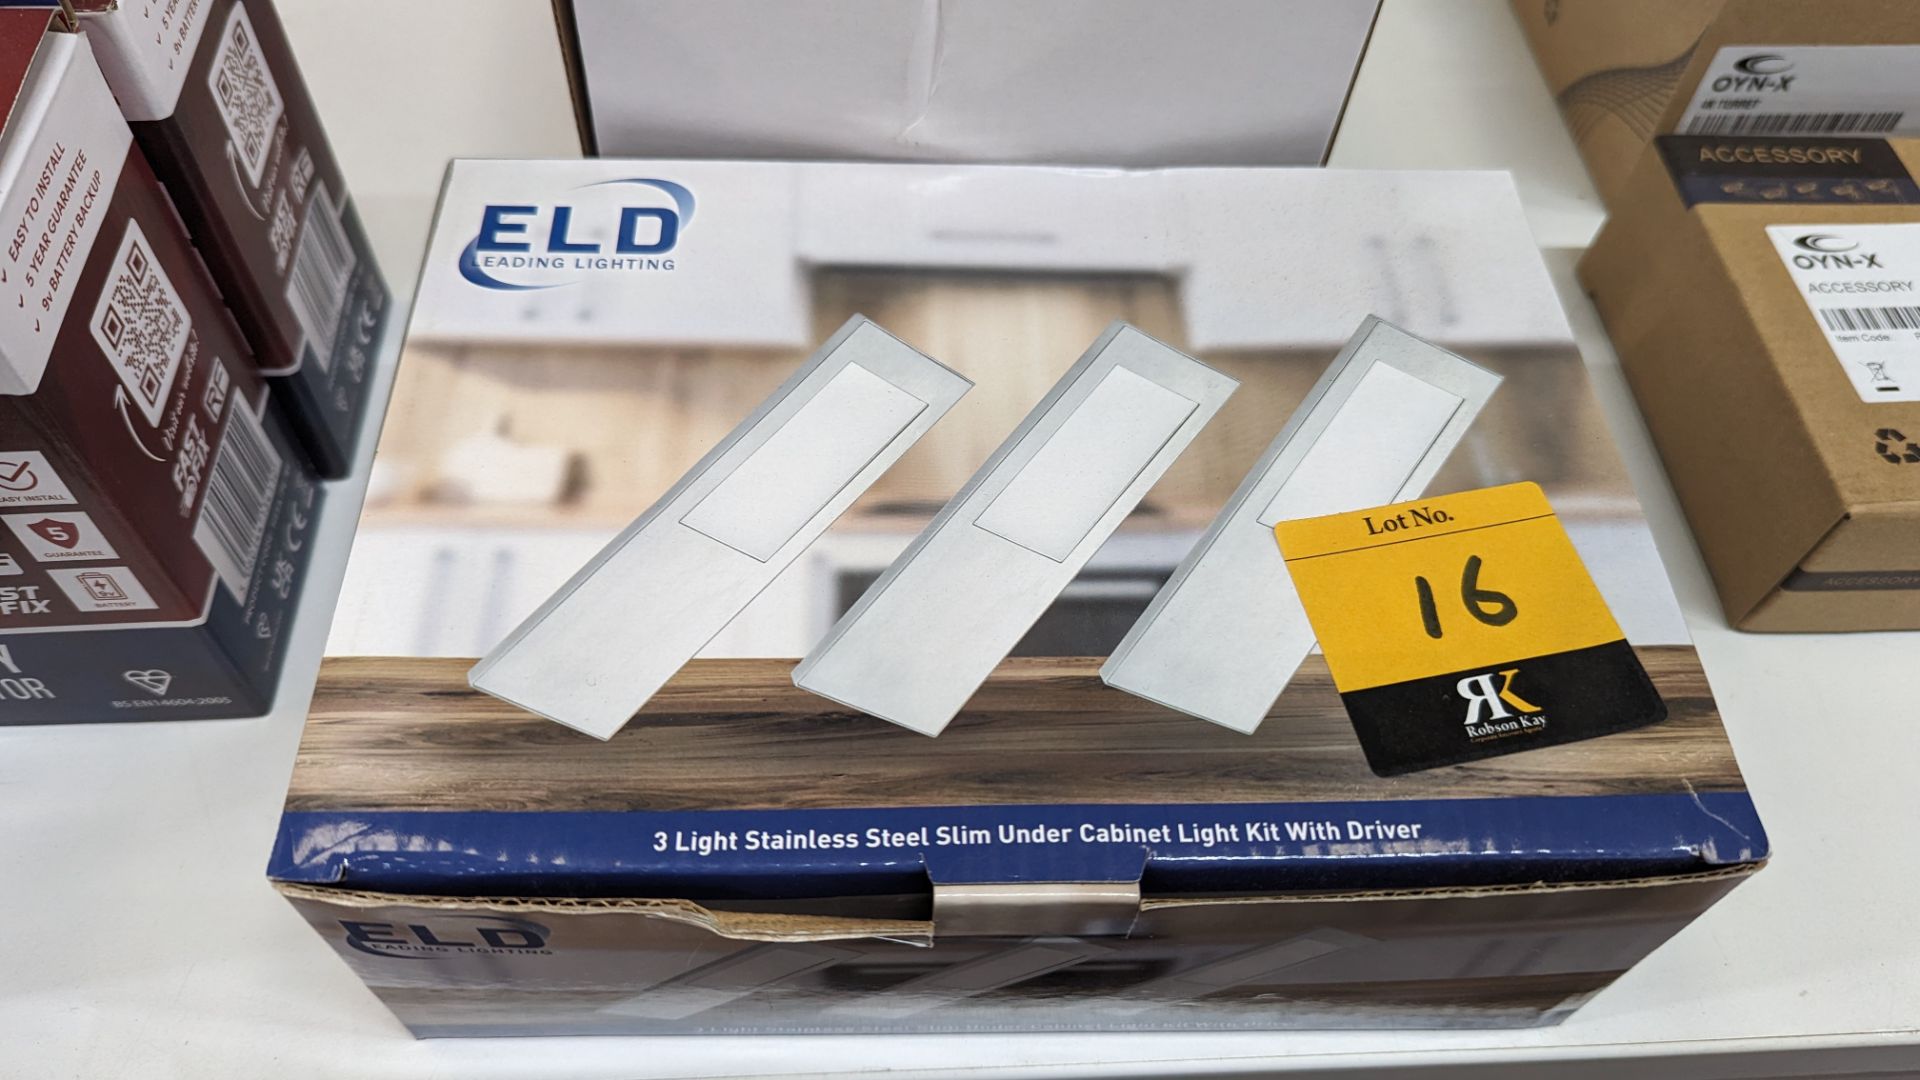 ELD set of 3 slim stainless steel under cabinet lamps with driver